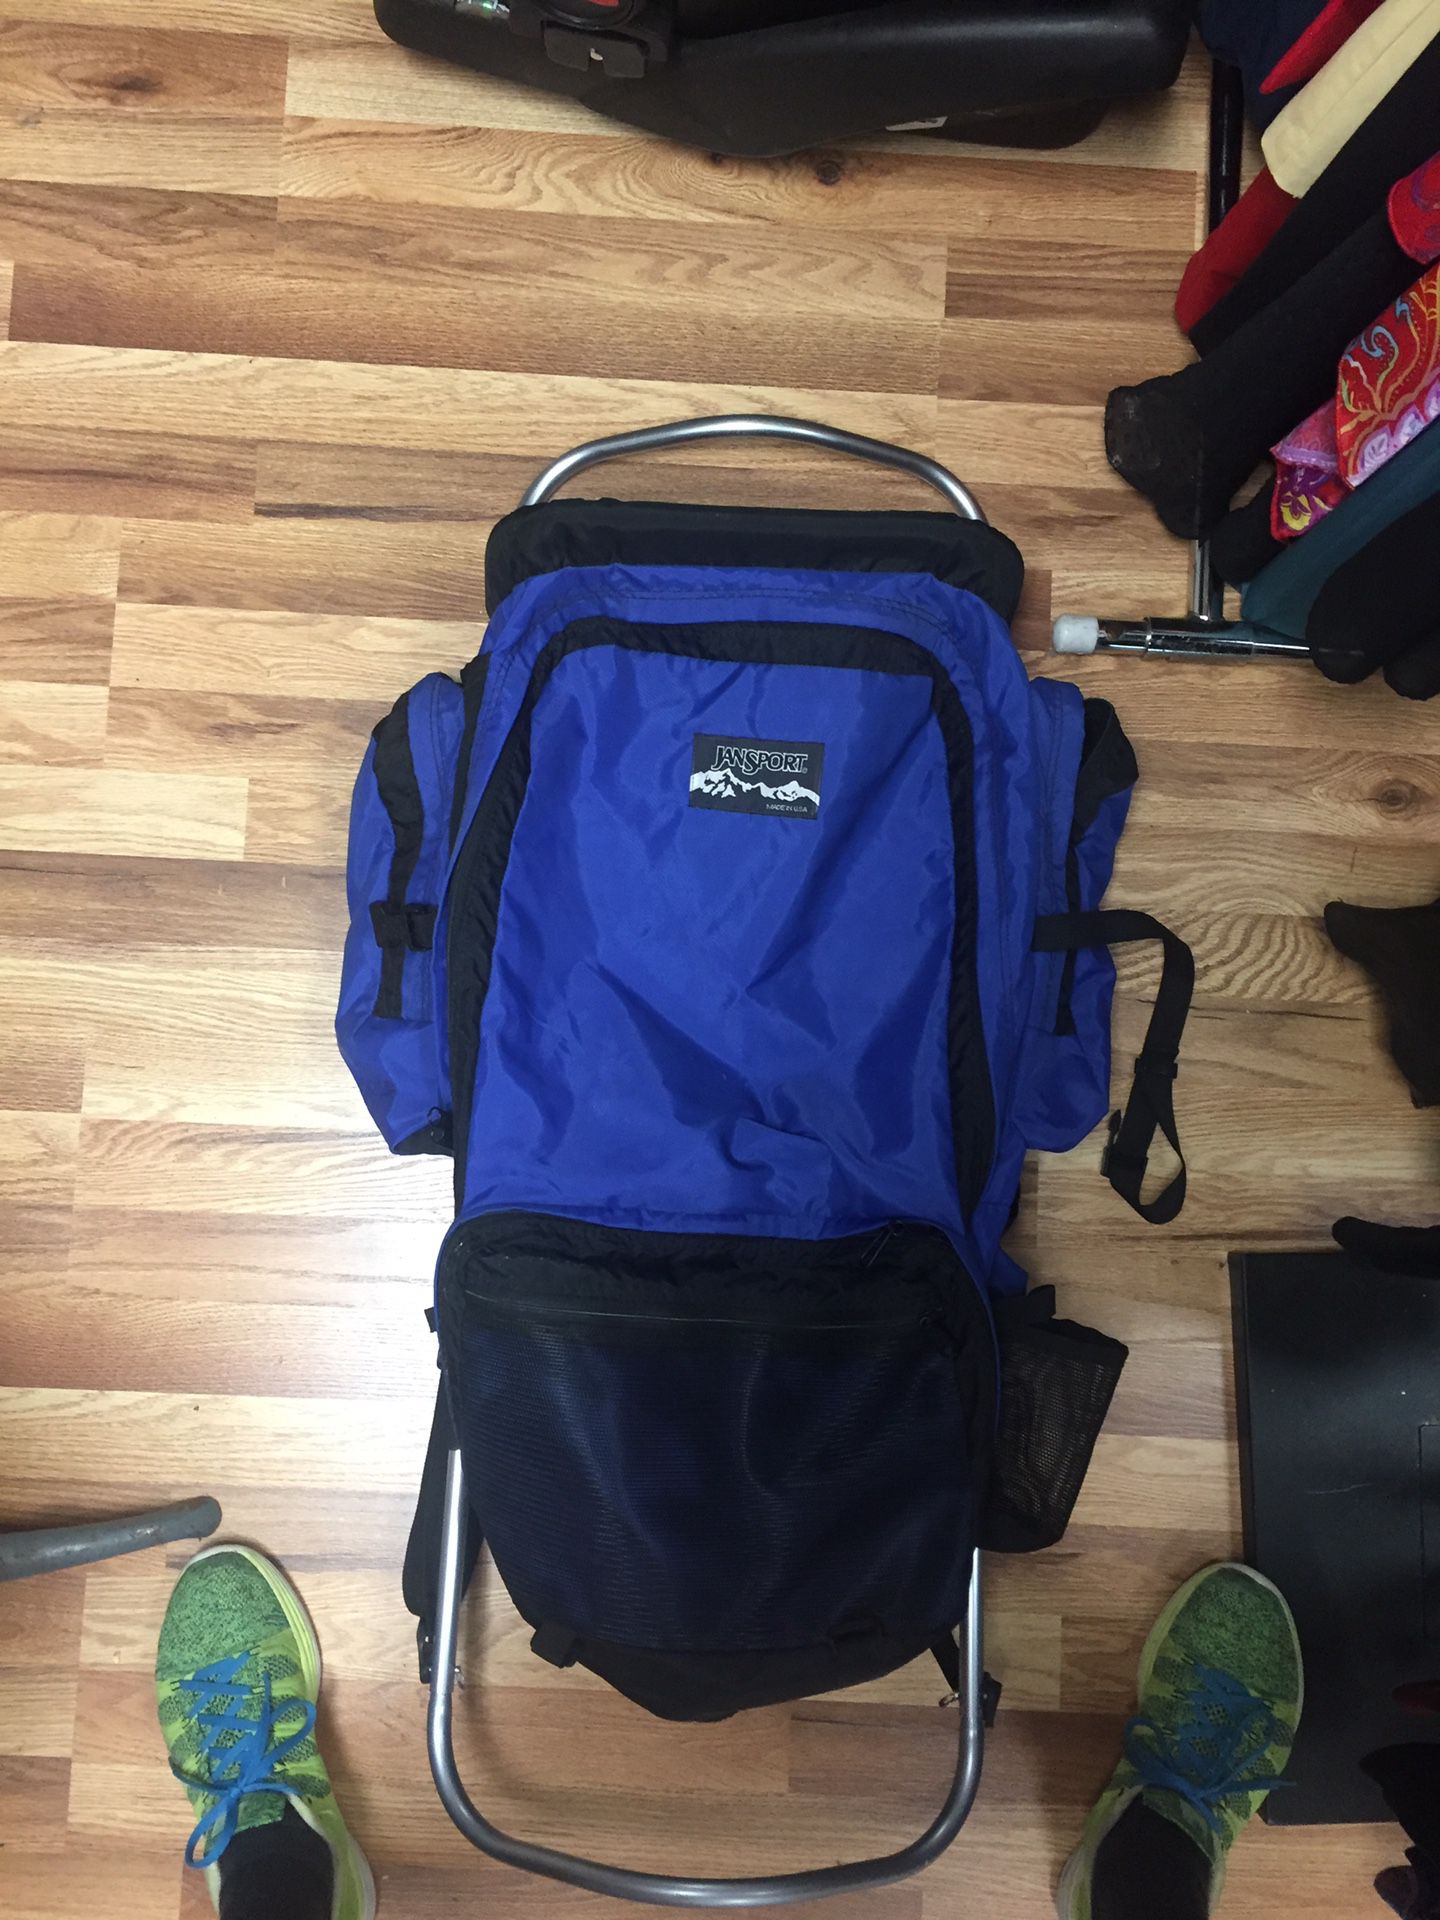 Camping/hiking backpack with external-frame